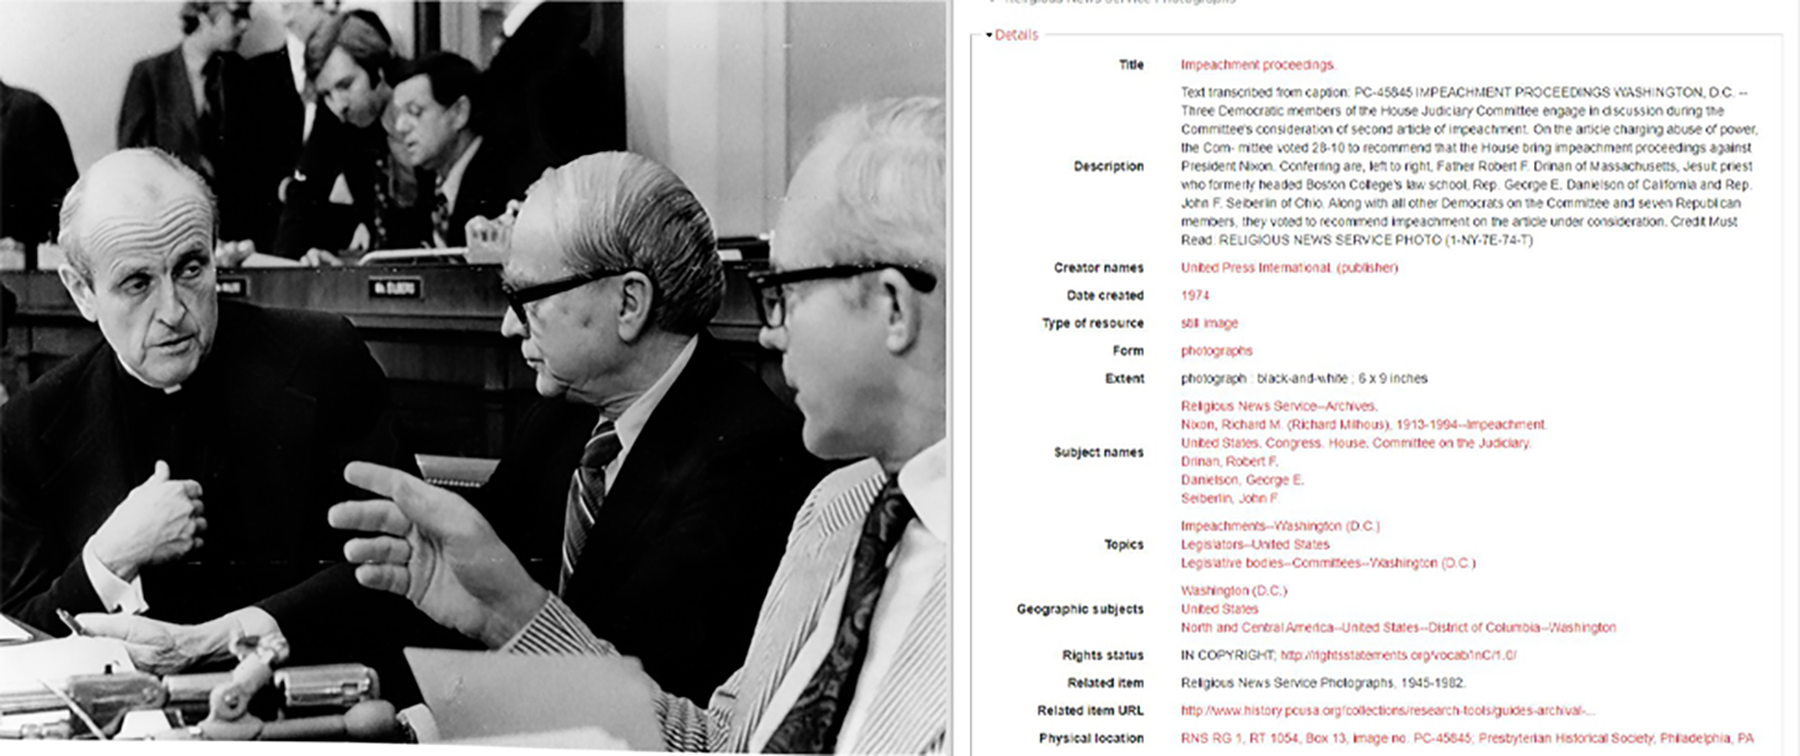 Left: Three Democratic members of the House Judiciary Committee discuss the committee’s consideration of second article of impeachment, 1974. [Pearl ID: 344114]. Right: Metadata associated with image. During the RNS Digitization Project, archivists will research and apply approved terminology for 22,500 images.